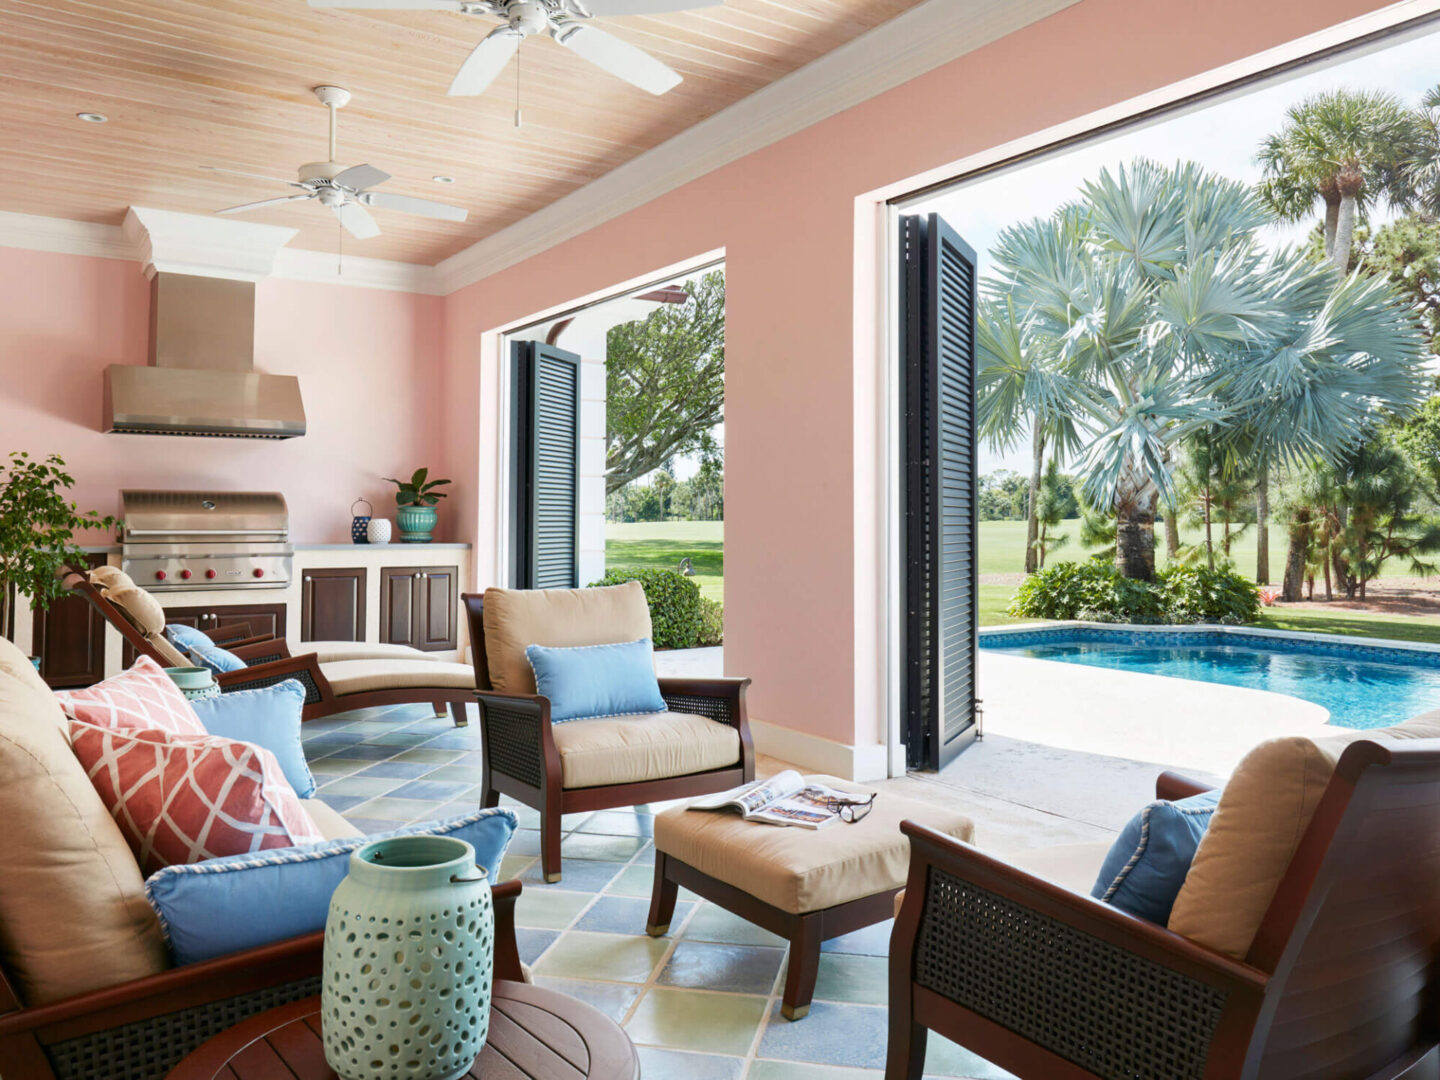 A living room with pink walls and a pool.